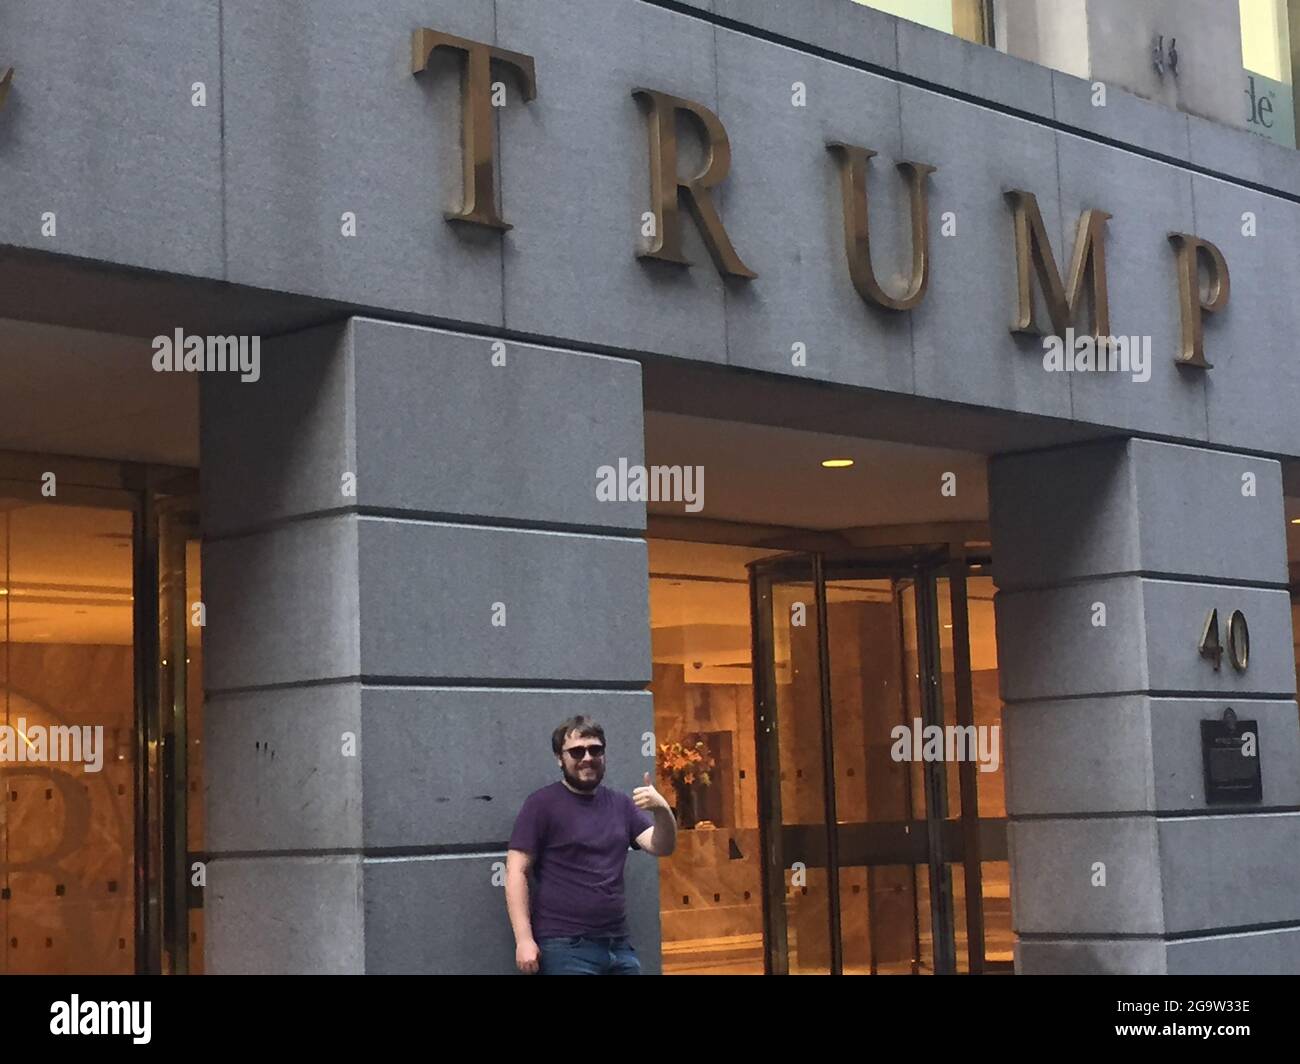 The Trump Building in New York Stock Photo